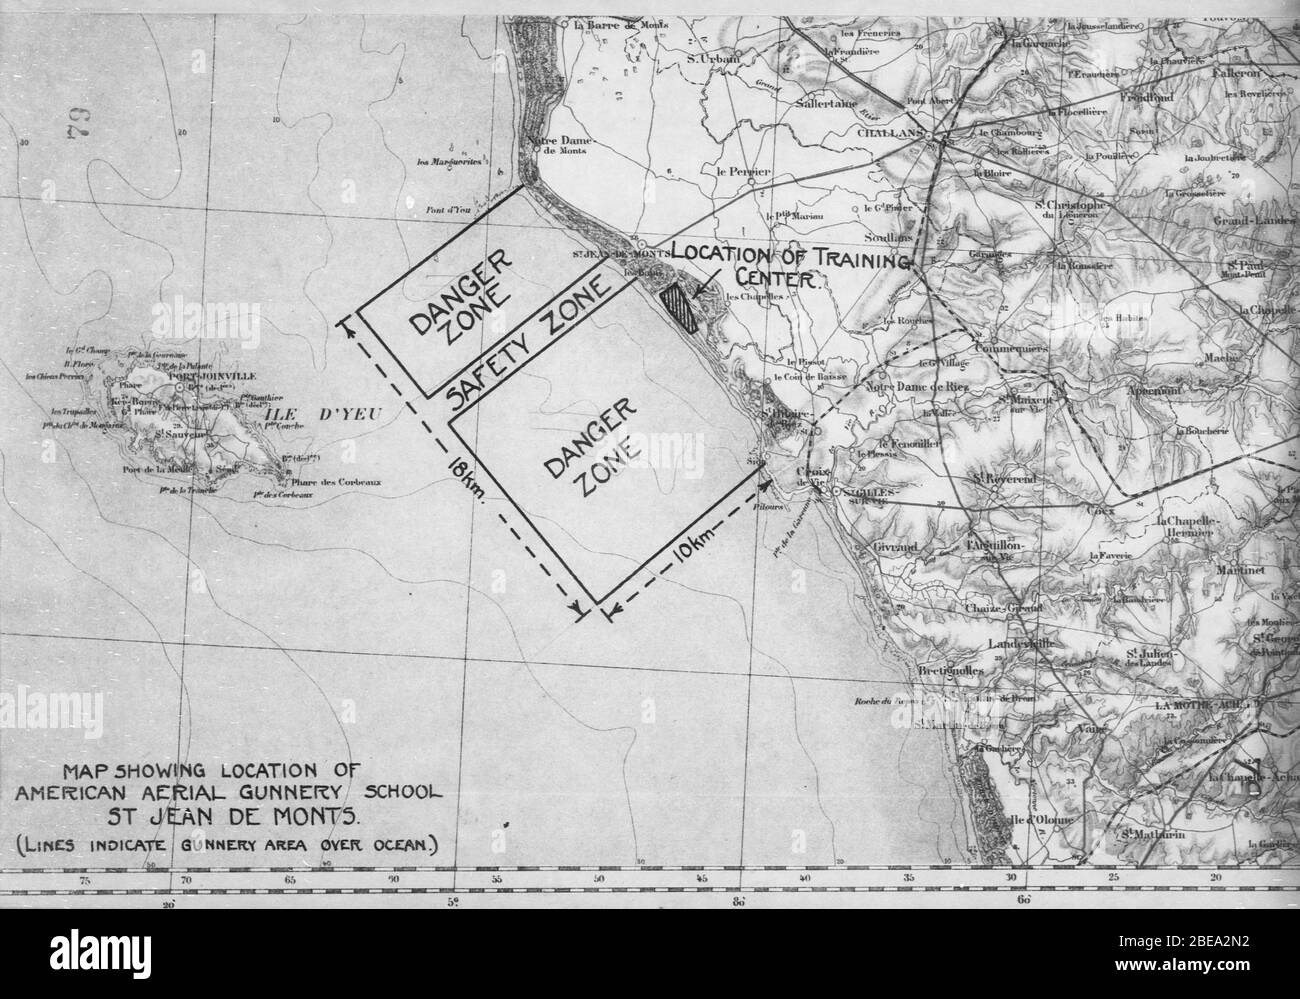 English: Location map of the American Aireal Gunnery School - St Jean de  Monts, France; 1918; US National Archives, Gorrell's History of the  American Expeditionary Forces Air Service, Series J Volume 10